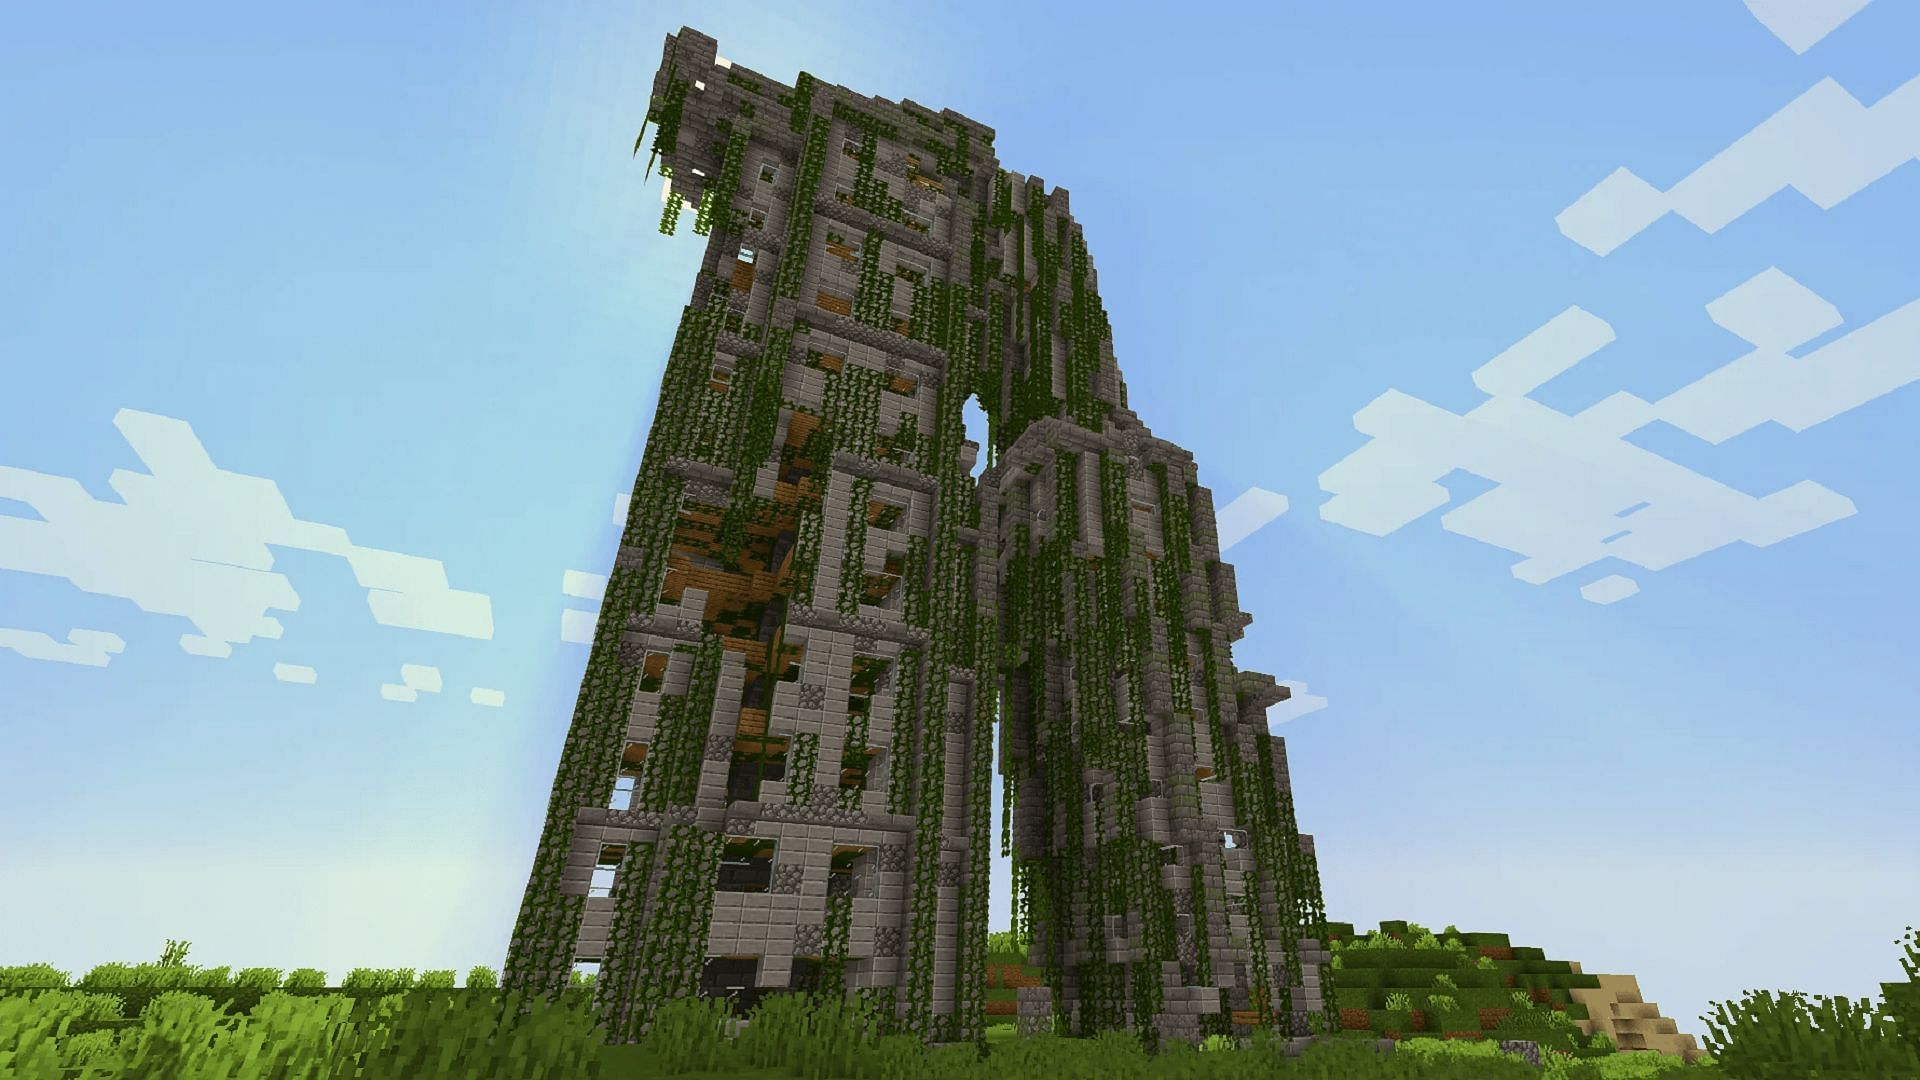 These towers have seen better days, but they make for a fantastic rustic Minecraft build (Image via Curious_camel1/Reddit)